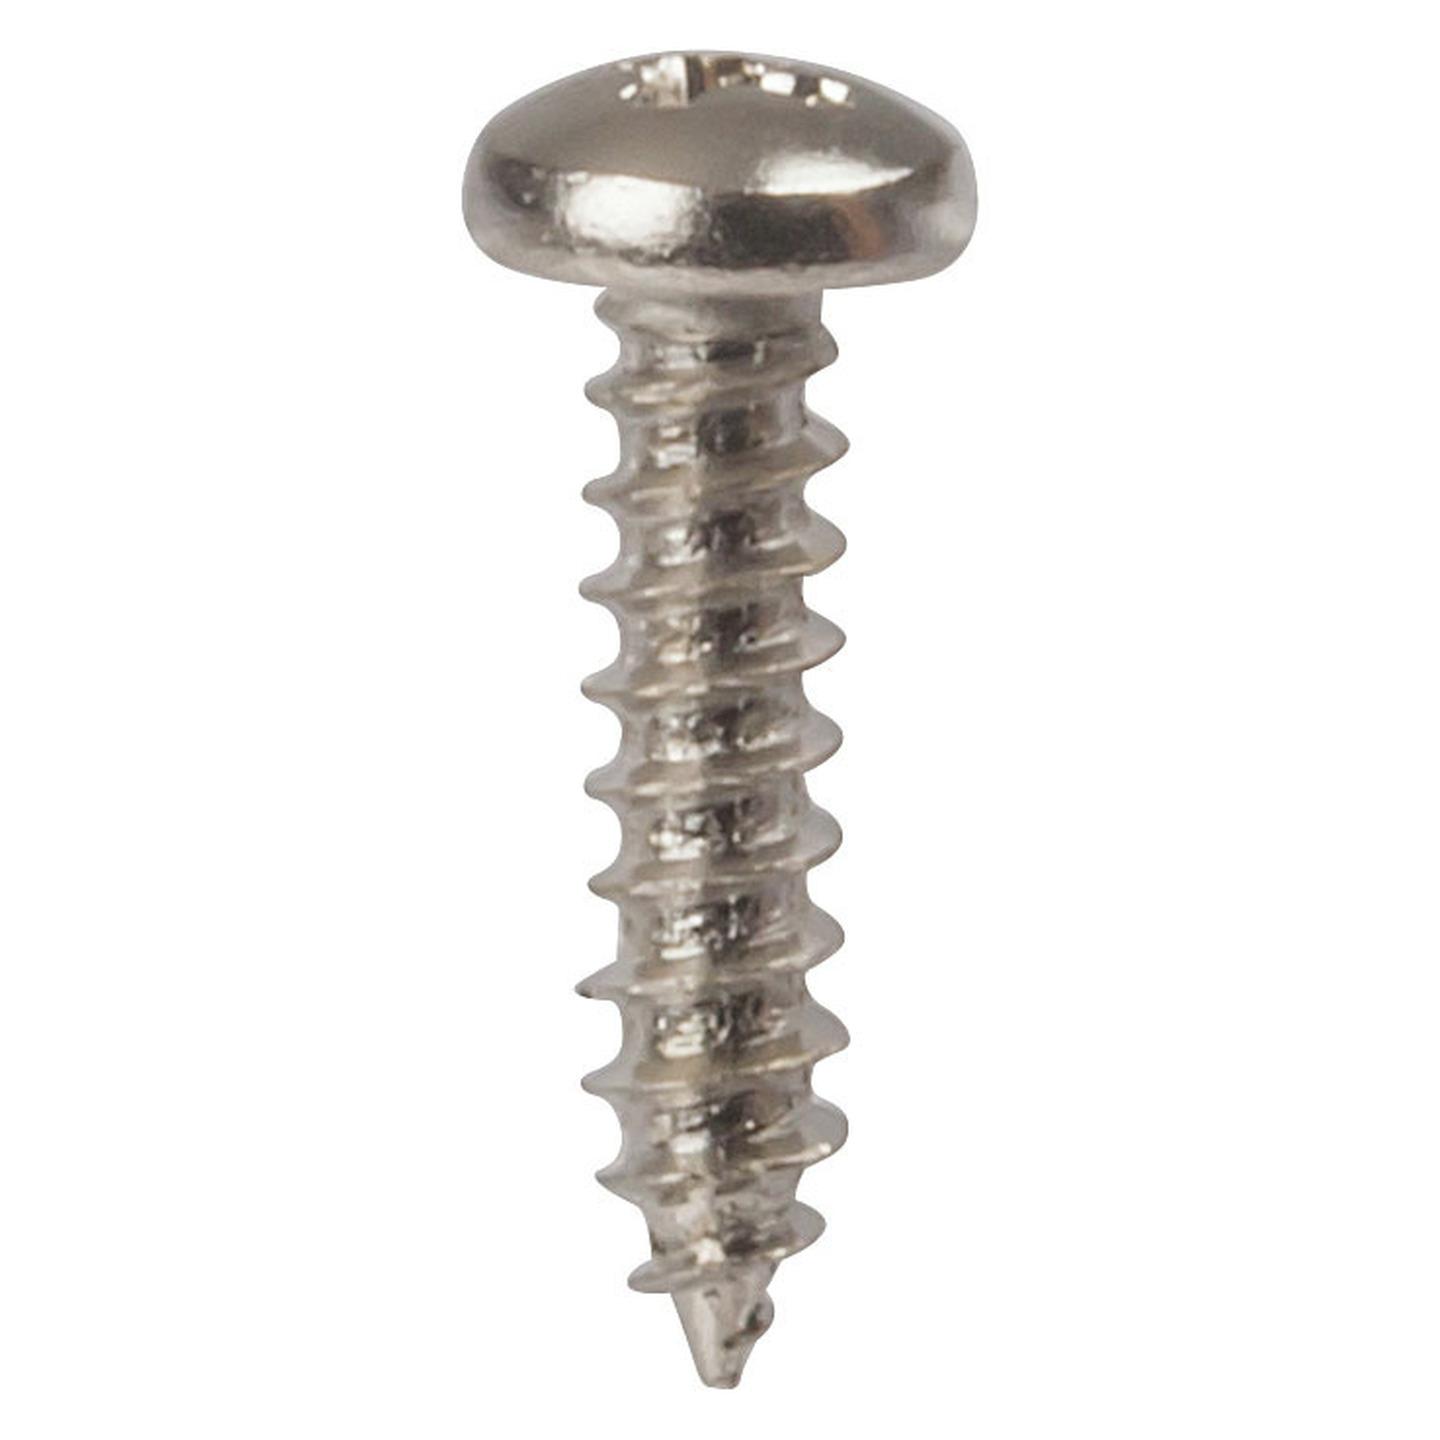 No.4 x 12mm Steel Self Tapping Screws - Pack of 25